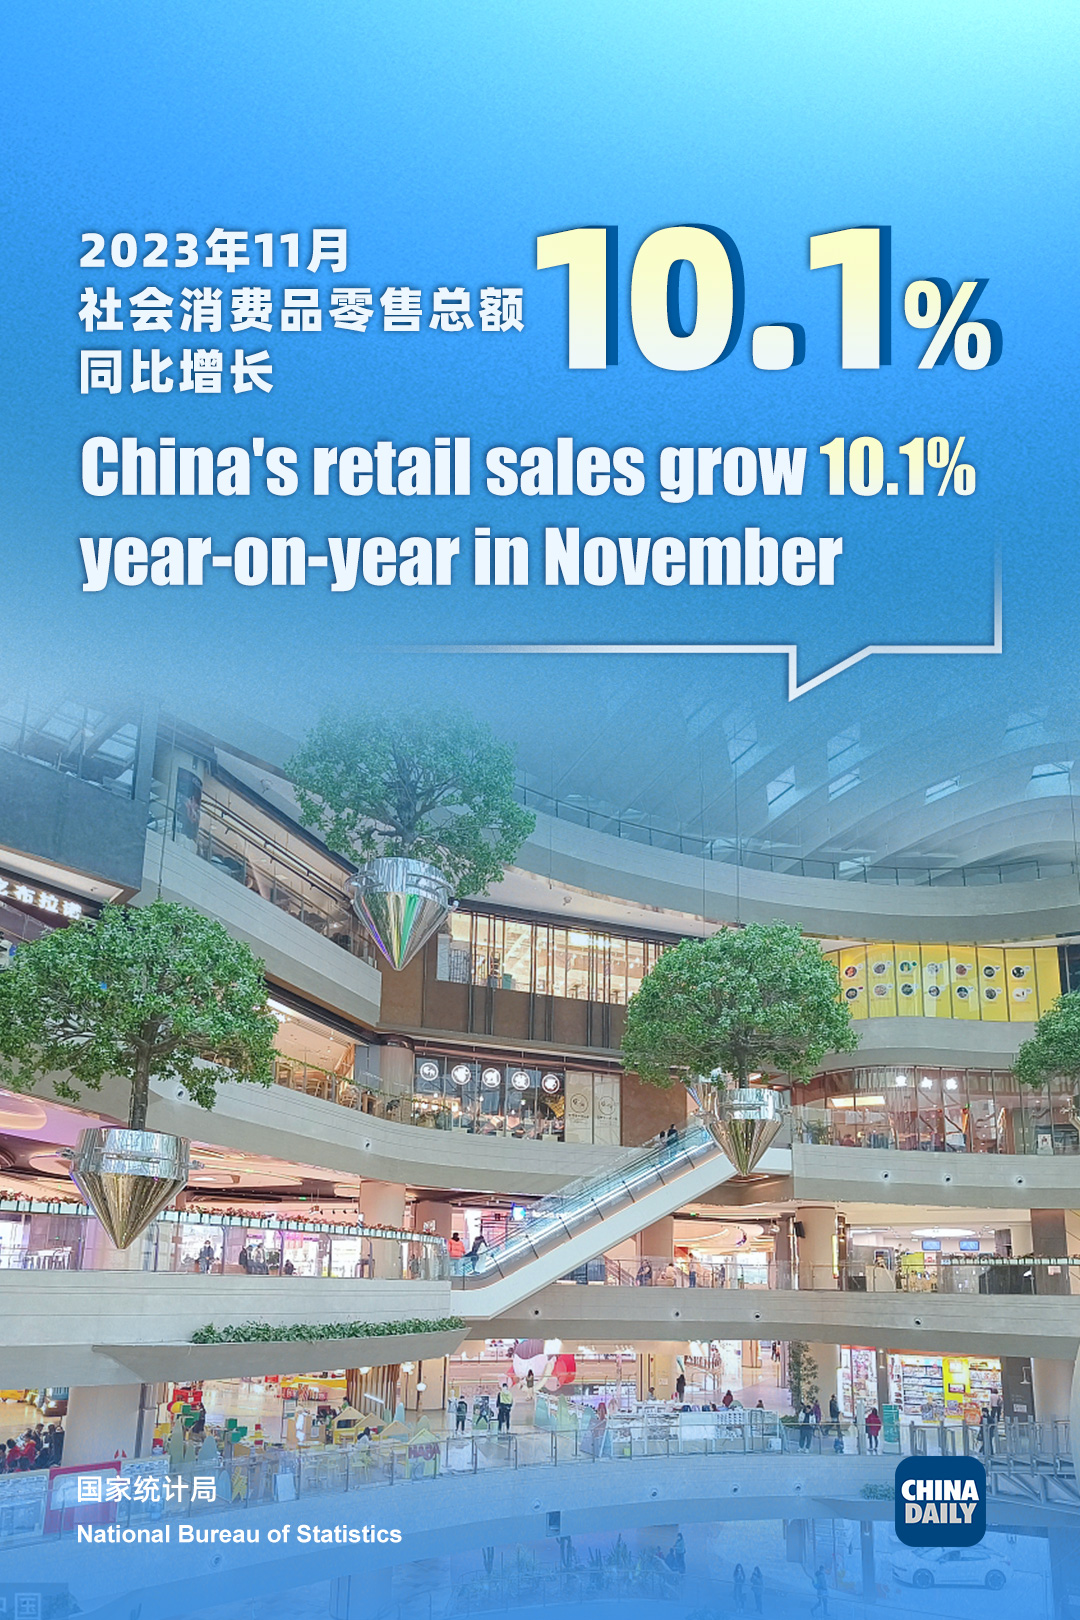 China's retail sales grow 10.1% year-on-year in November